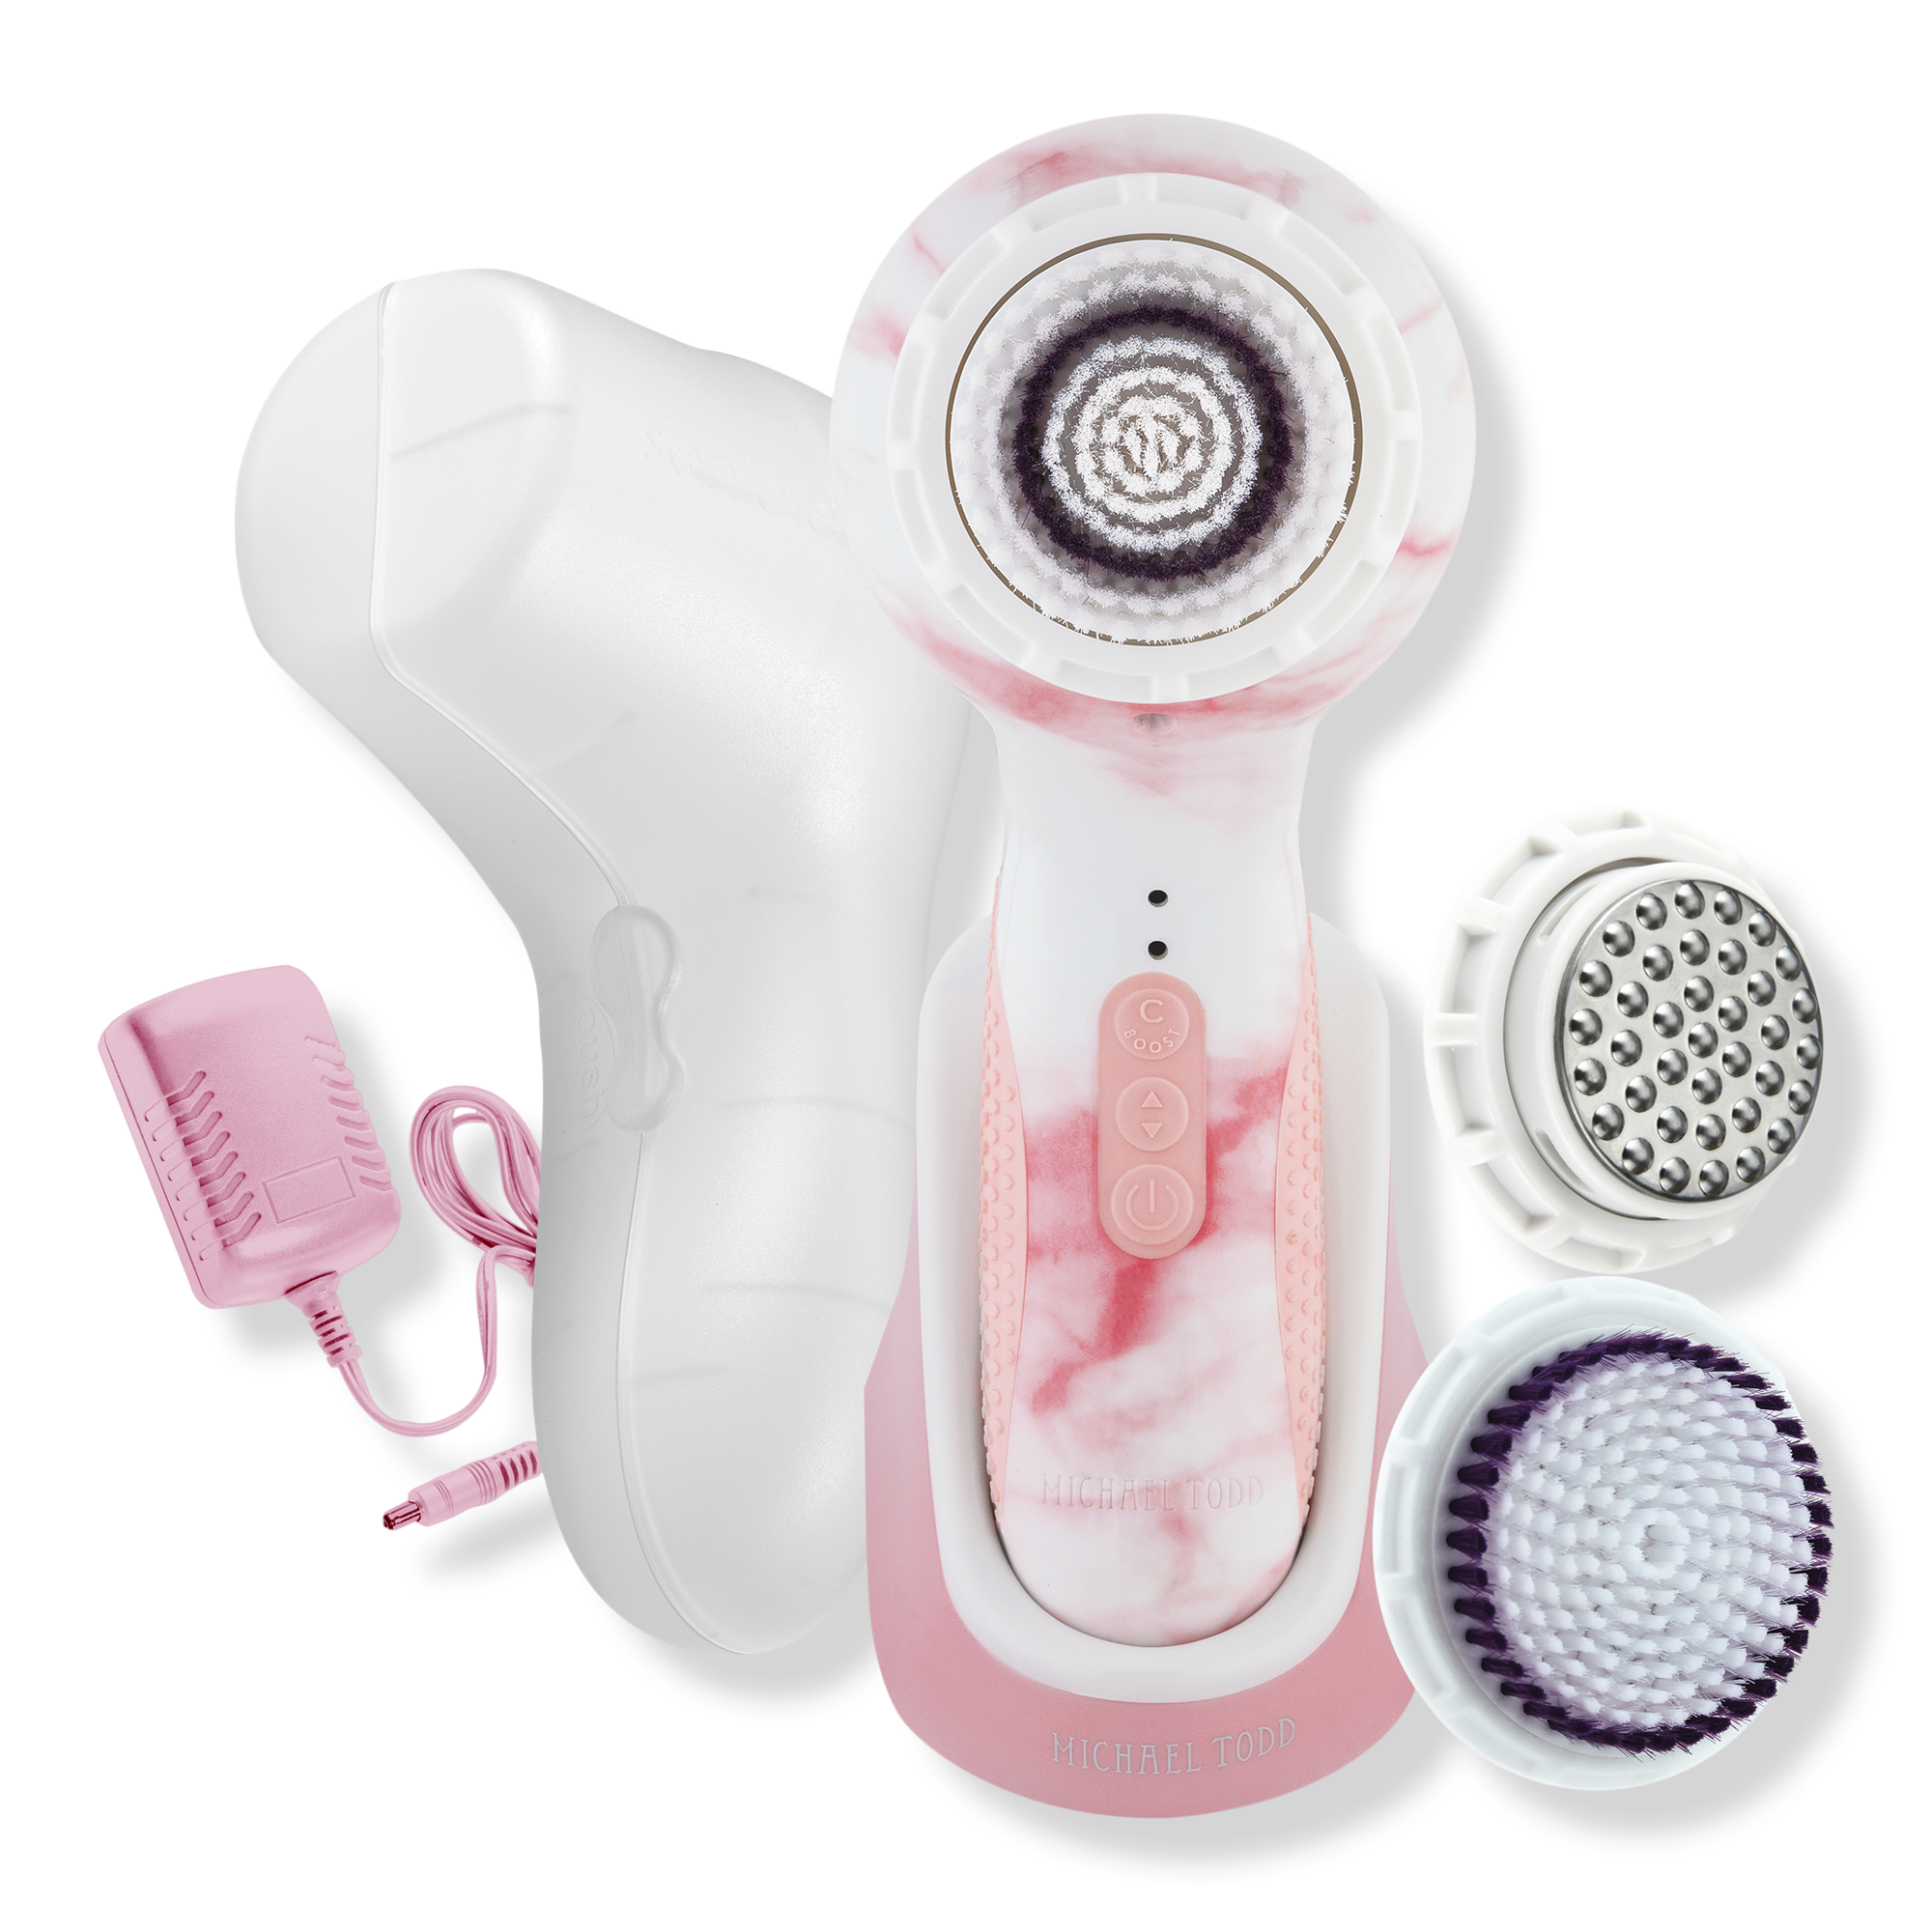 Soniclear Elite Patented Face and Body Antimicrobial Sonic Skin Cleansing System pic pic